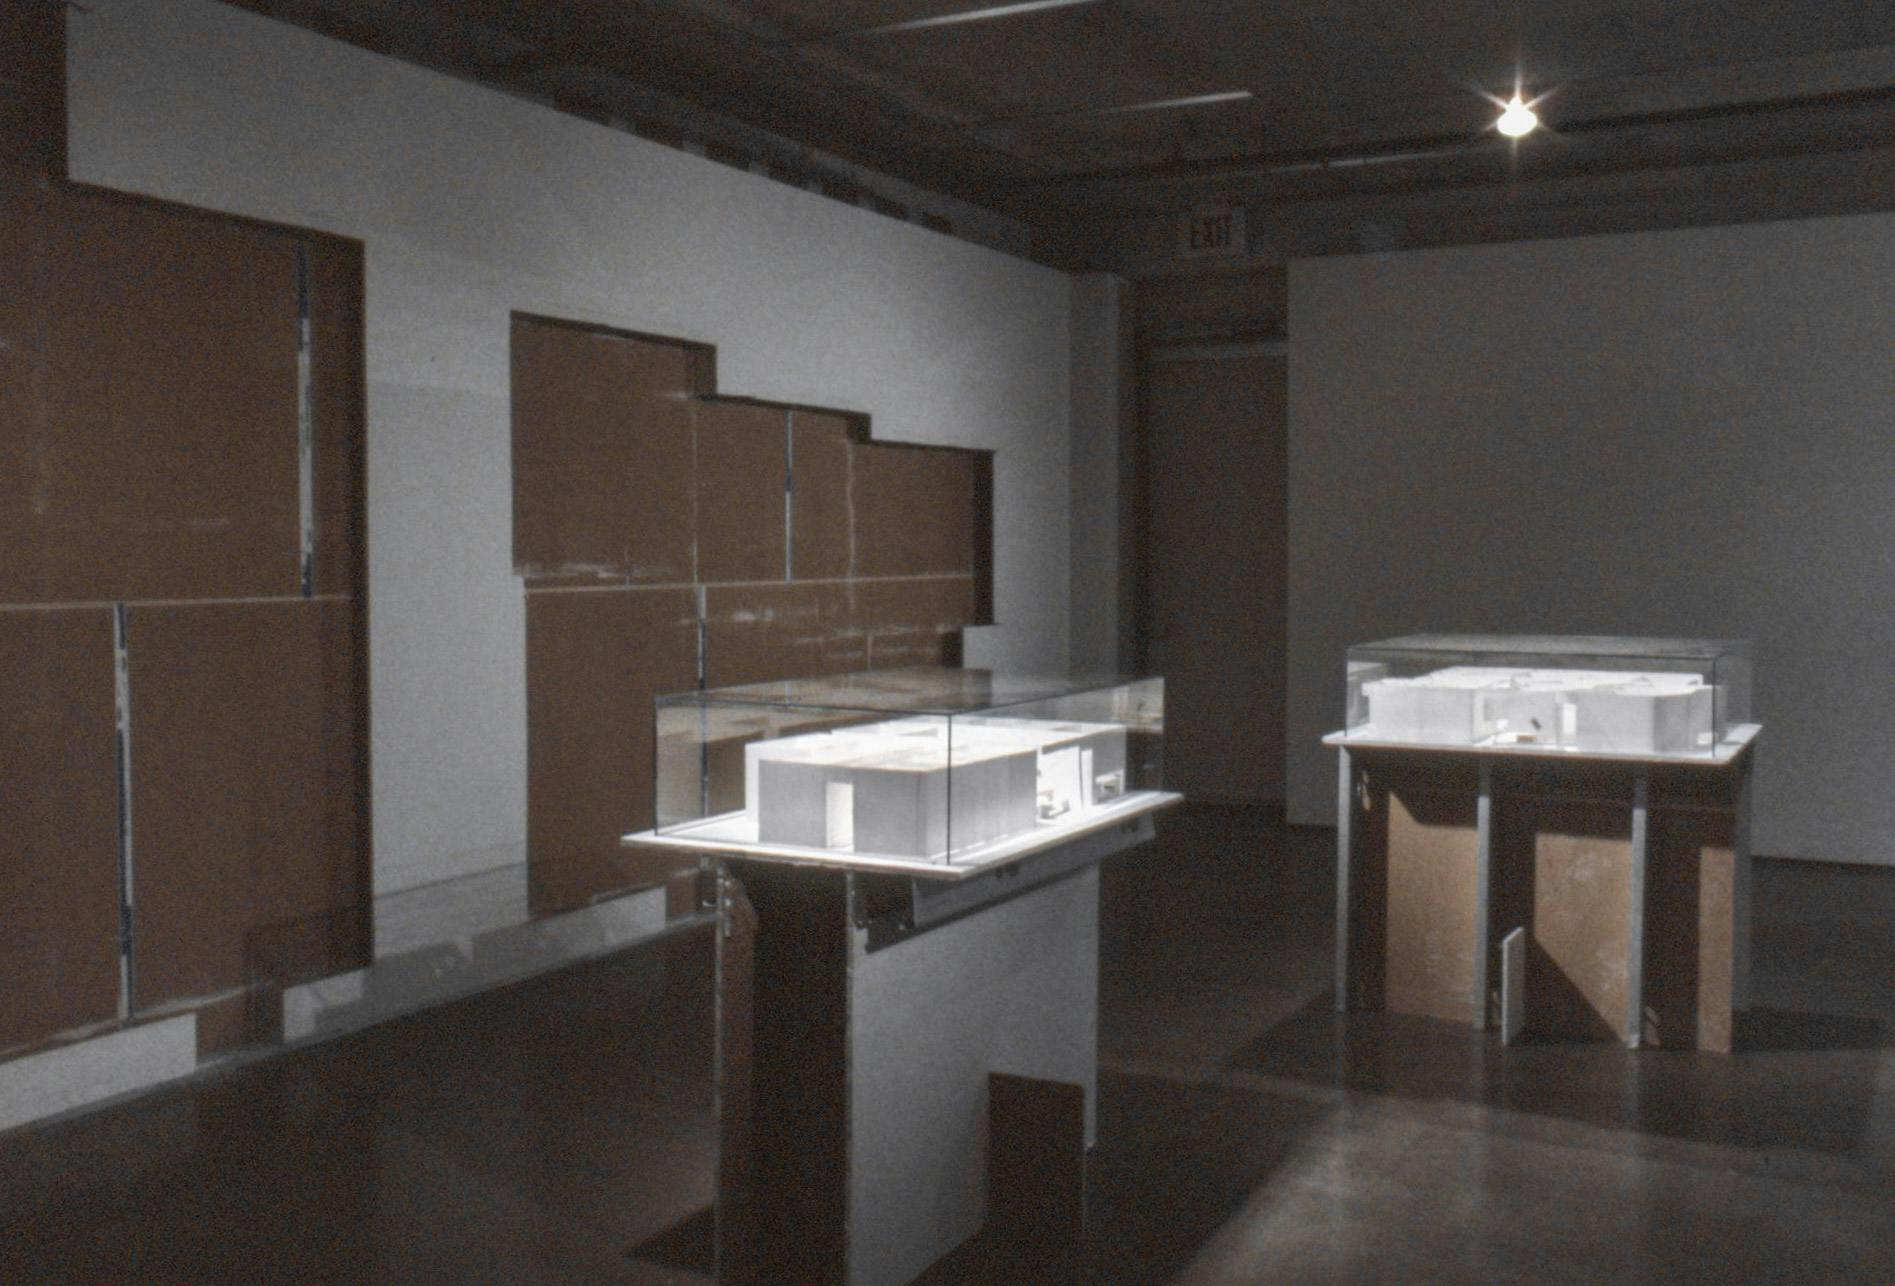 A set of white sculptures in display boxes are placed in a gallery space. White tiles on one of the gallery walls were removed, making the brown internal part of the wall visible. 